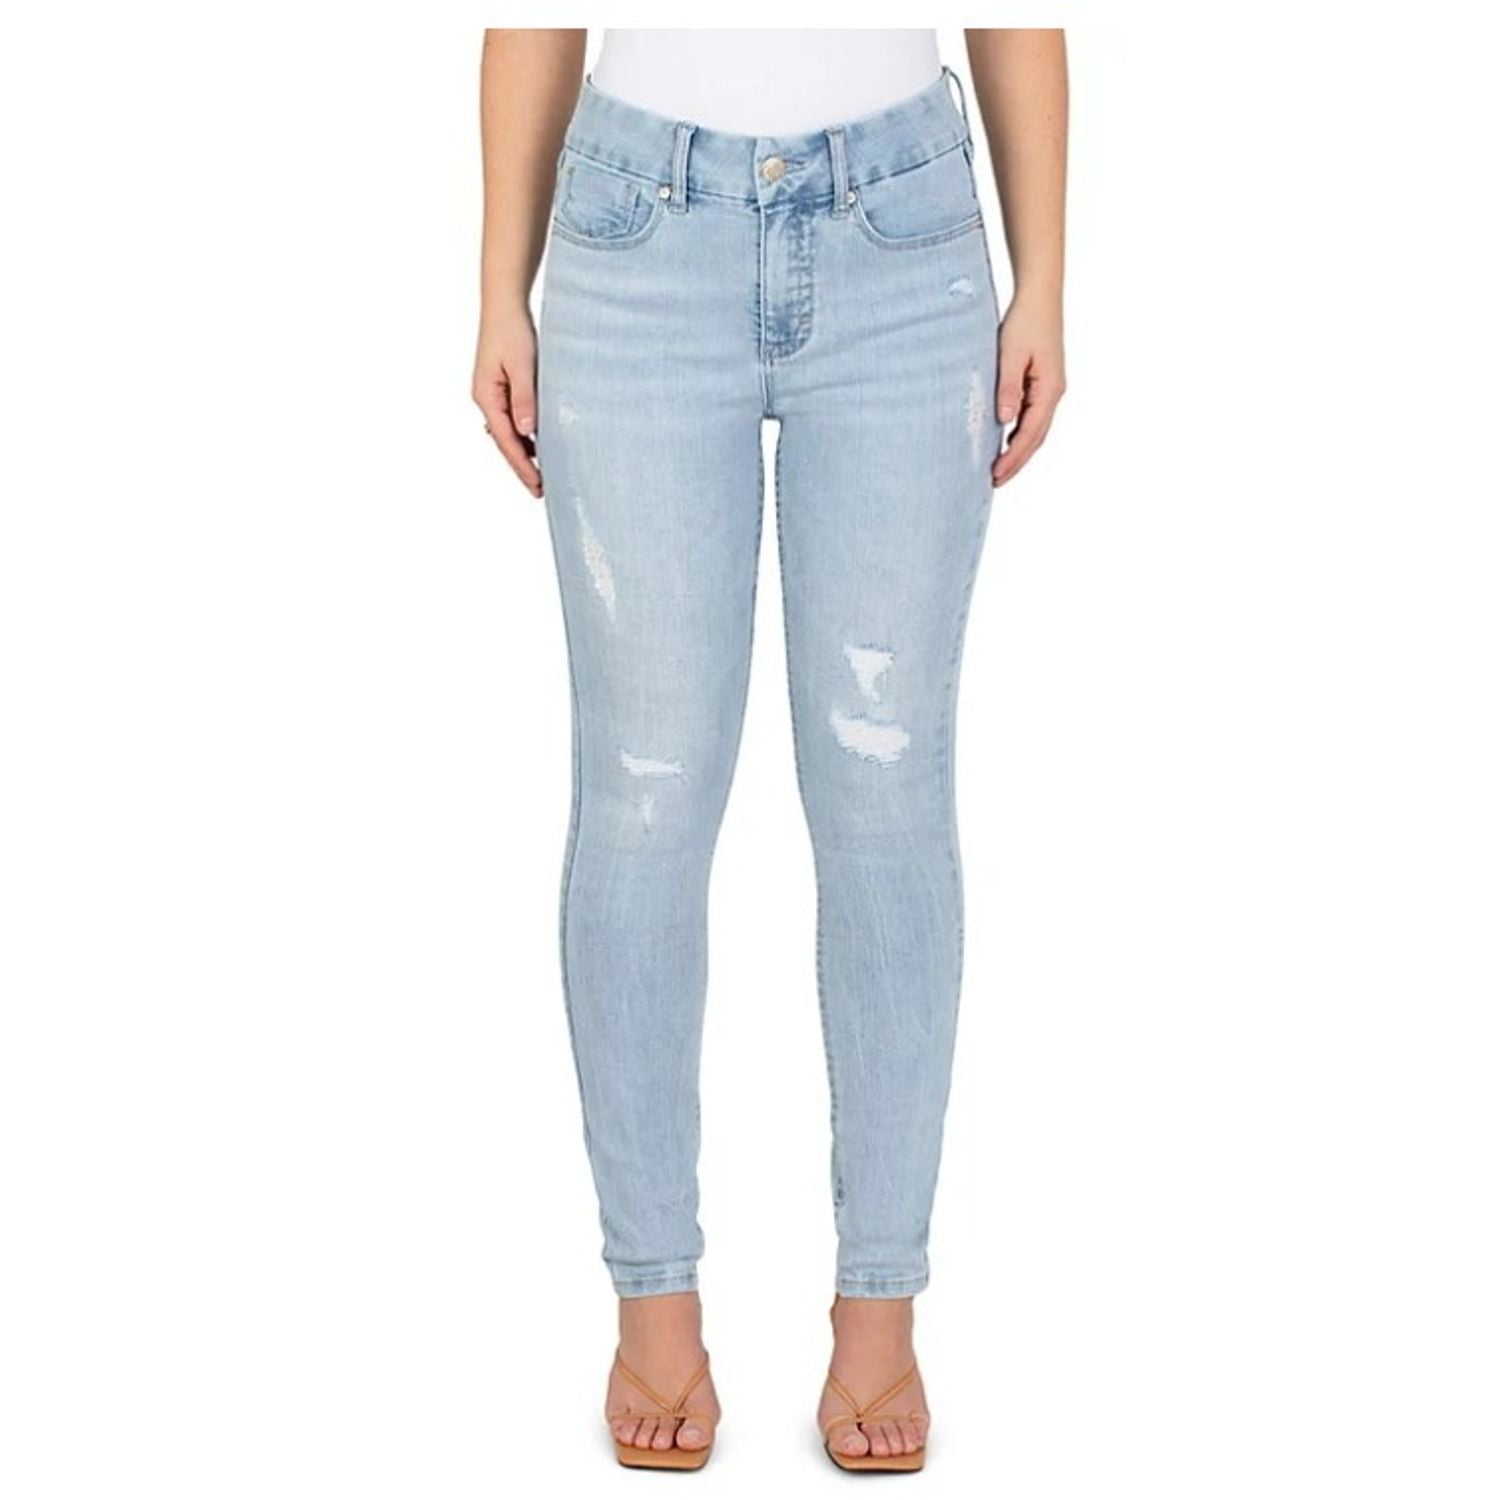 High Rise Tummyless Skinny Jean at Seven7 Jeans